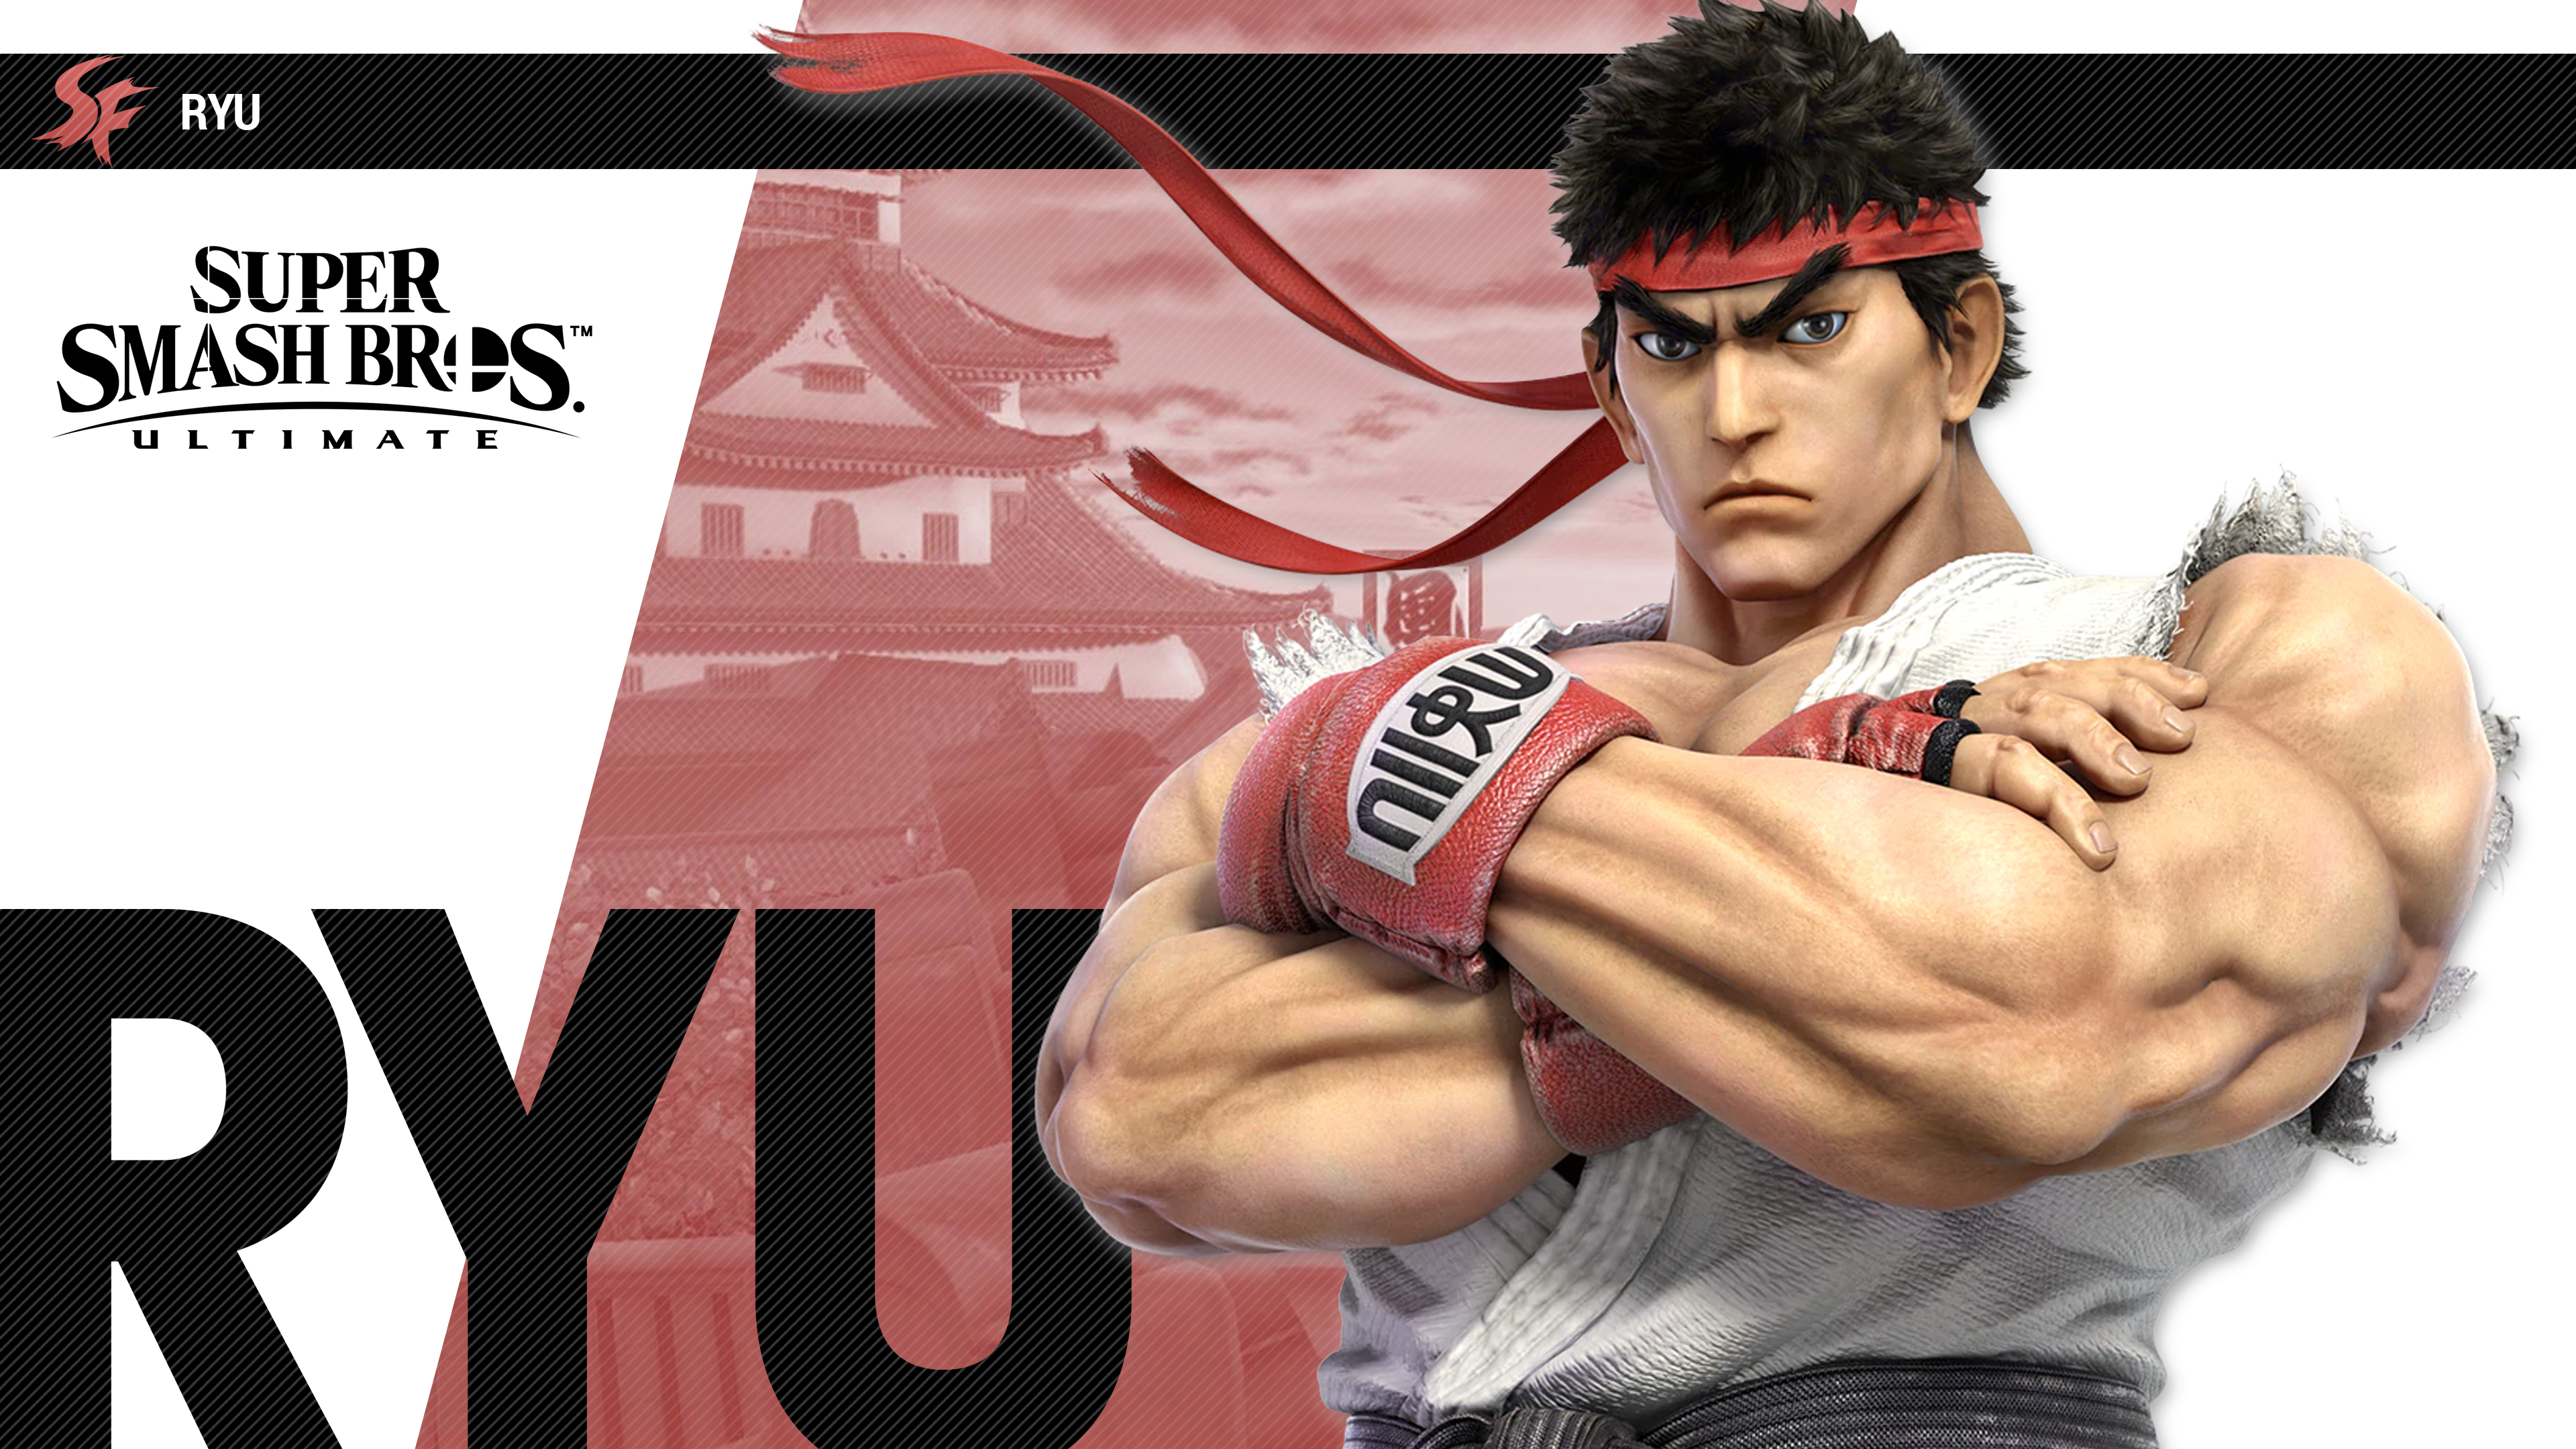 3840x2160 Super Smash Bros Ultimate Ryu Wallpapers Cat with Monocle